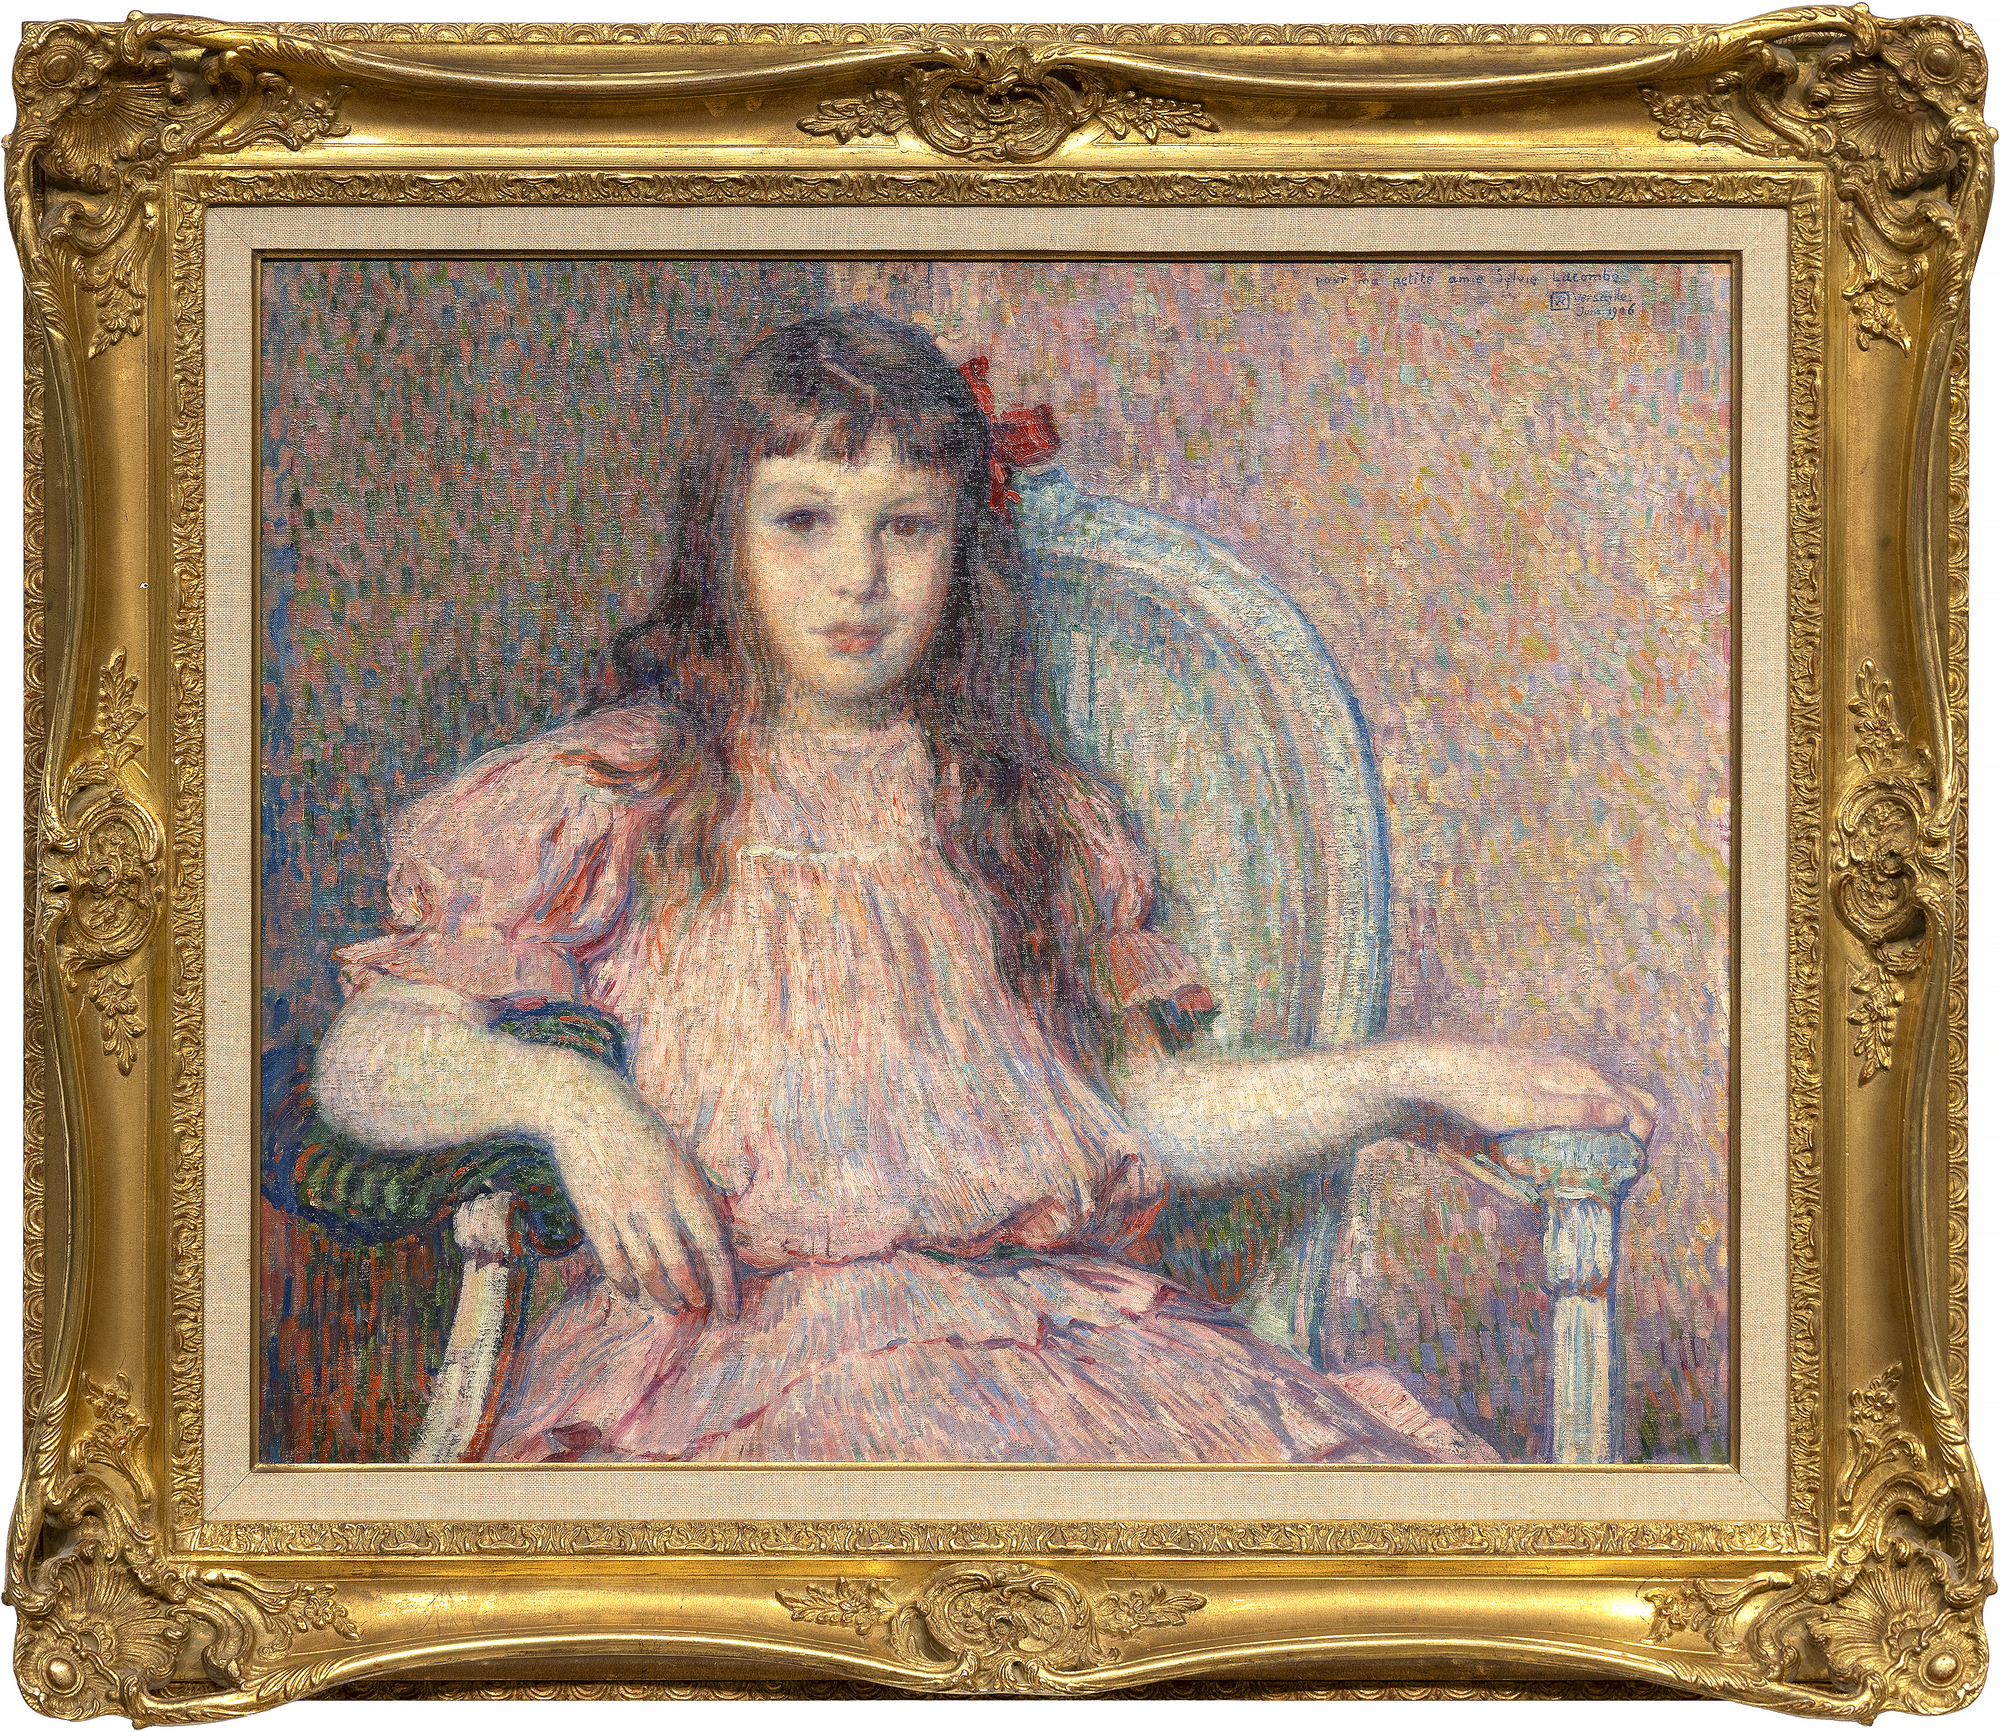 Théo van Rysselberghe’s Portrait de Sylvie Lacombe, painted in 1906, is a classic masterwork by one of the most refined and consistent portrait painters of his time. The color is harmonious, the brushwork vigorous and tailored to its material task, her body and countenance true and revealing. The sitter is the daughter of his good friend, the painter Georges Lacombe, who shared a close association with Gauguin, and was a member of Les Nabis with artists Bonnard, Denis, and Vuillard, among others. We now know about Sylvie Lacombe because Van Rysselberghe is so skilled at rendering subtle facial expressions and through careful observation and attention to detail, provided insights into her inner world. He has chosen a direct gaze, her eyes to yours, an inescapable covenant between subject and viewer regardless of our physical relationship to the painting. Van Rysselberghe had largely abandoned the Pointillist technique when he painted this portrait. But he continued to apply color theory guidelines by using tints of red — pinks and mauves — against greens to create a harmonious ameliorated palette of complementary colors to which he added a strong accent to draw the eye – an intensely saturated, red bow asymmetrically laid to the side of her head.